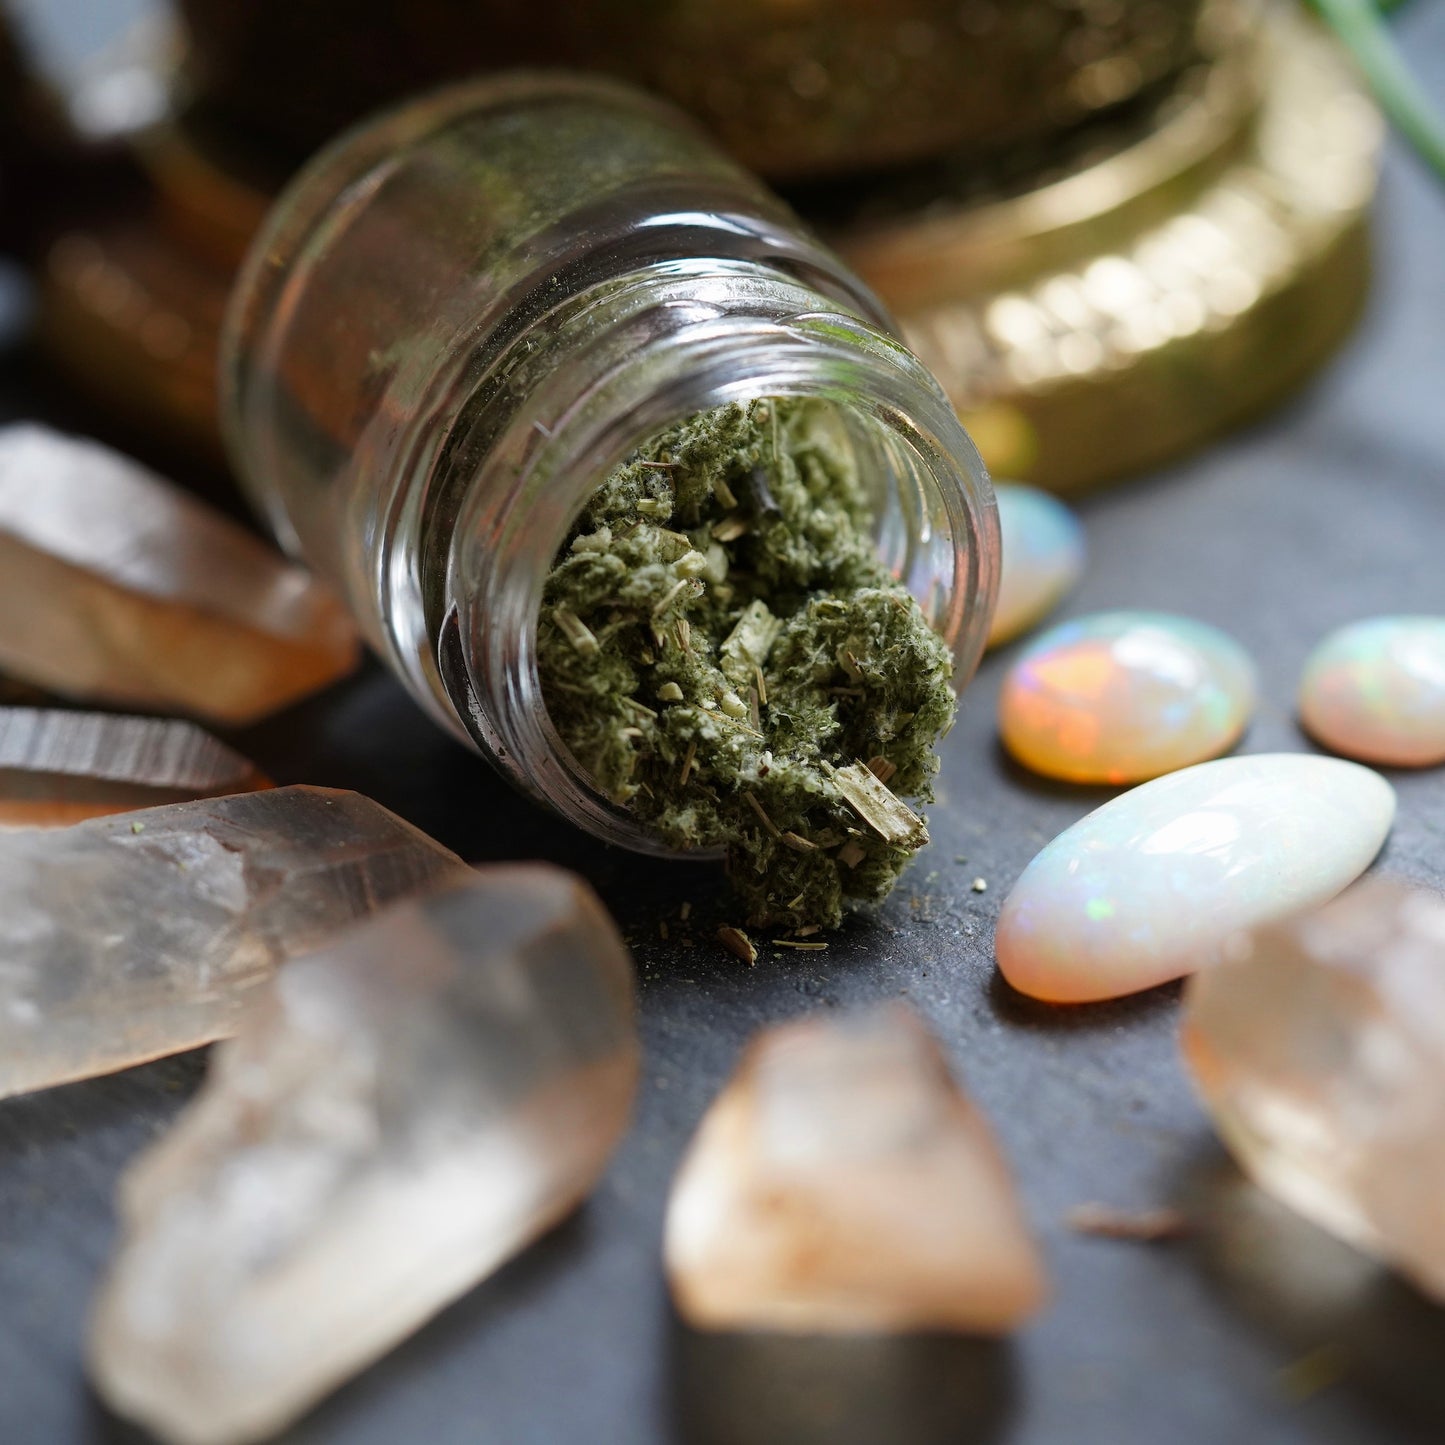 Raw Mugwort Herb spilling out of glass jar surrounded by Ethiopian opals and Hematite Quartz Crystal Points on a black background